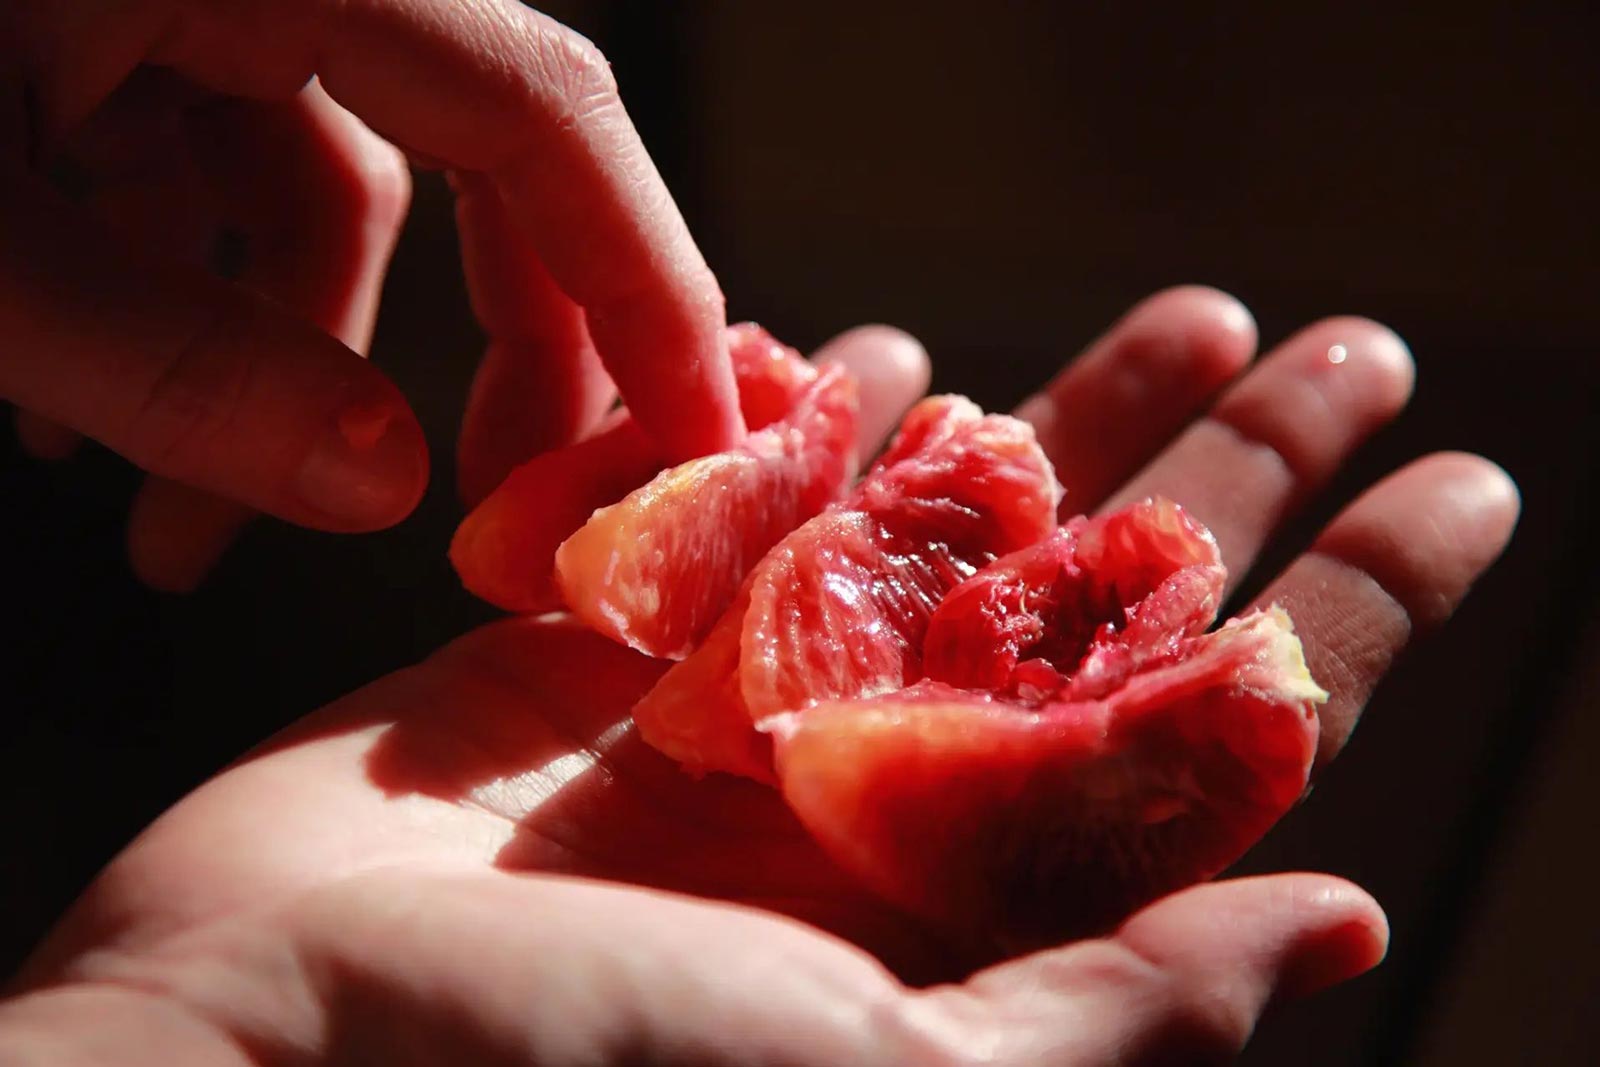 hands holding a juicy piece of fruit